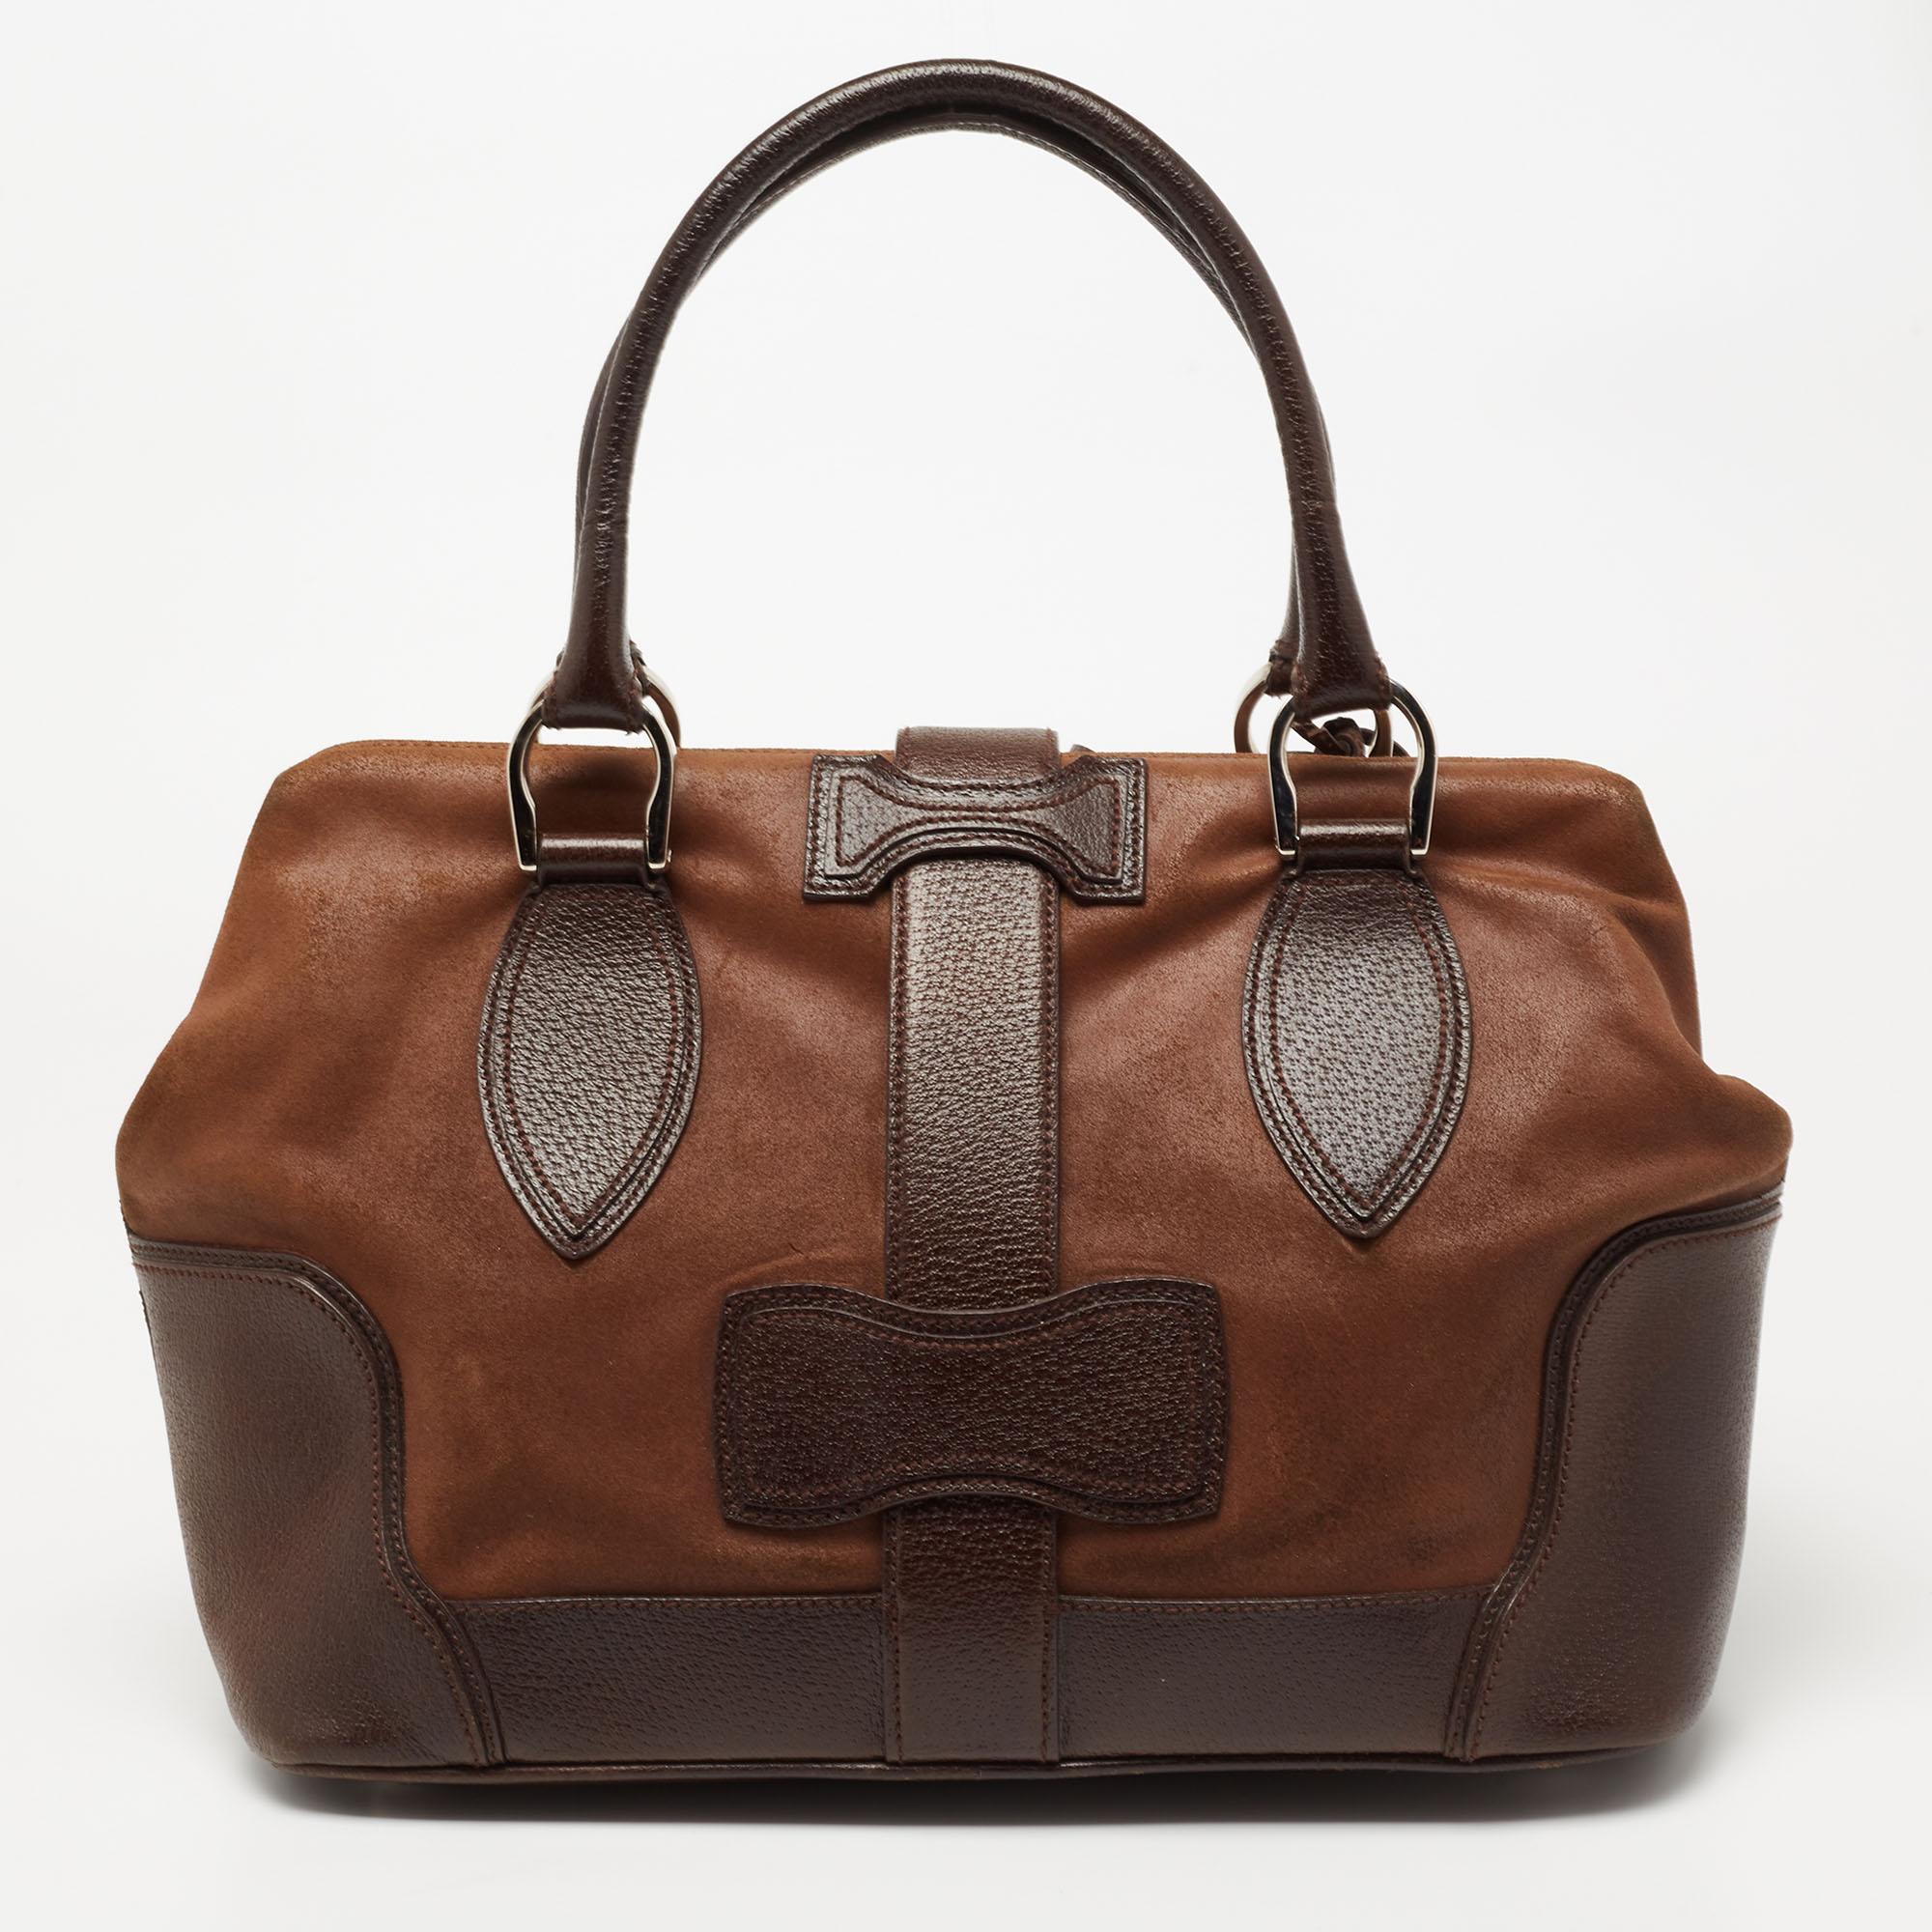 Stunning in appeal and high on style, this Sac Superb satchel from Balenciaga is a must-have accessory! It is created using brown leather and suede. It exhibits dual top handles, silver-tone hardware, and a roomy fabric-lined interior. Elevate your